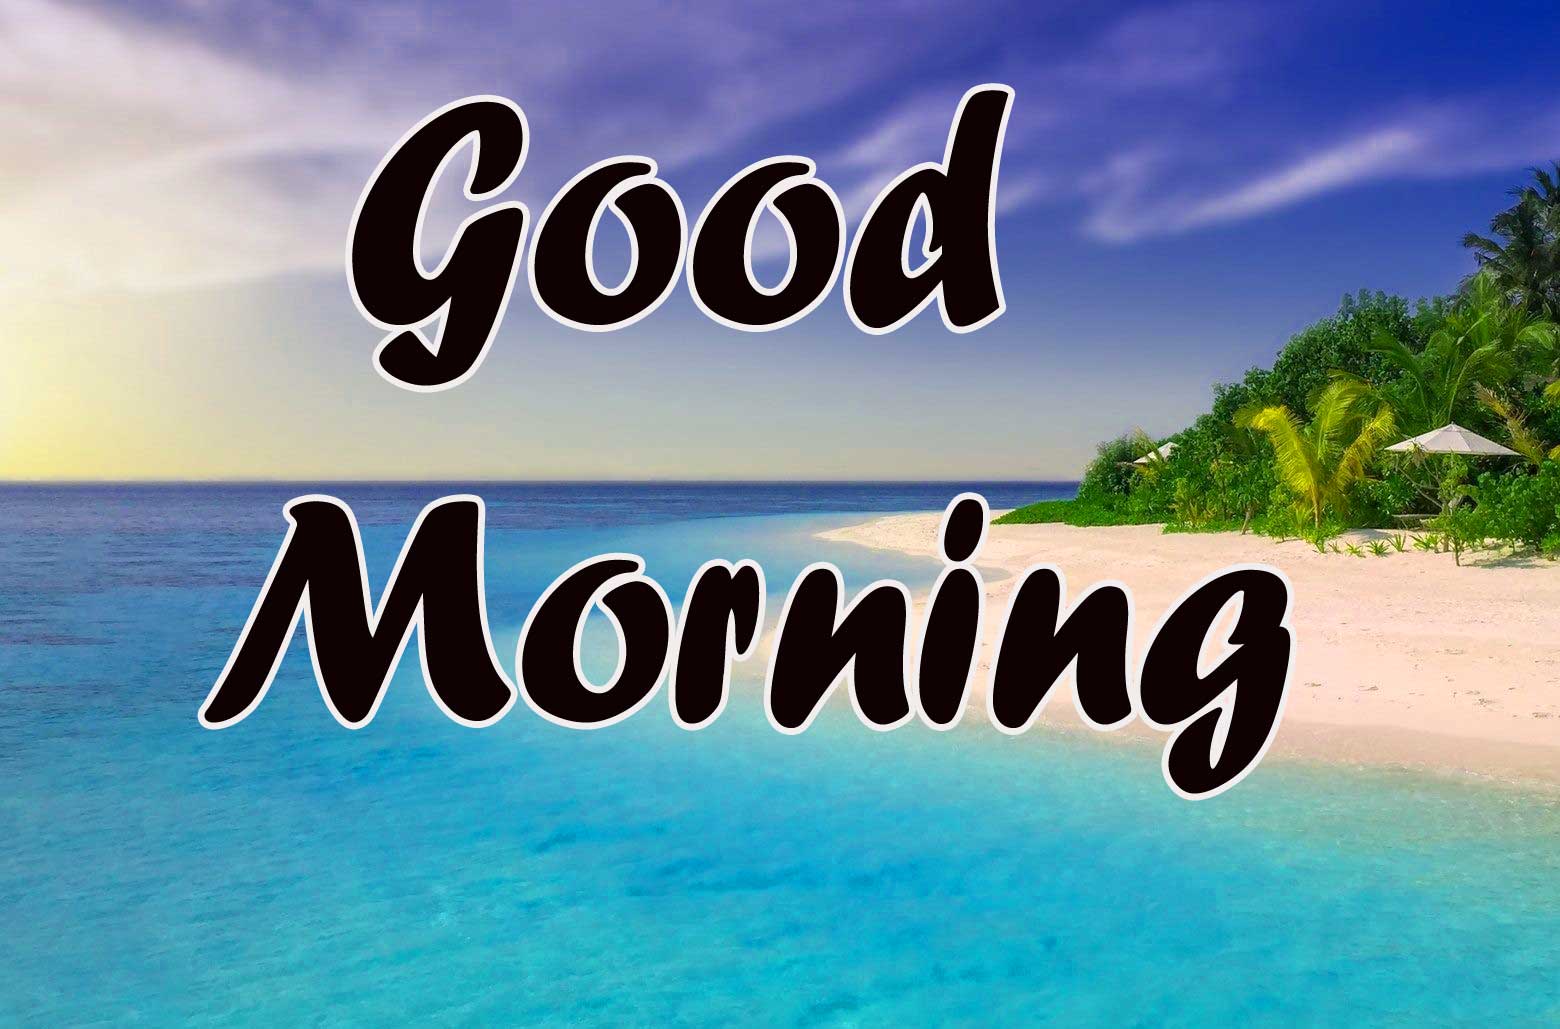 Good Morning Images Pics New Download 